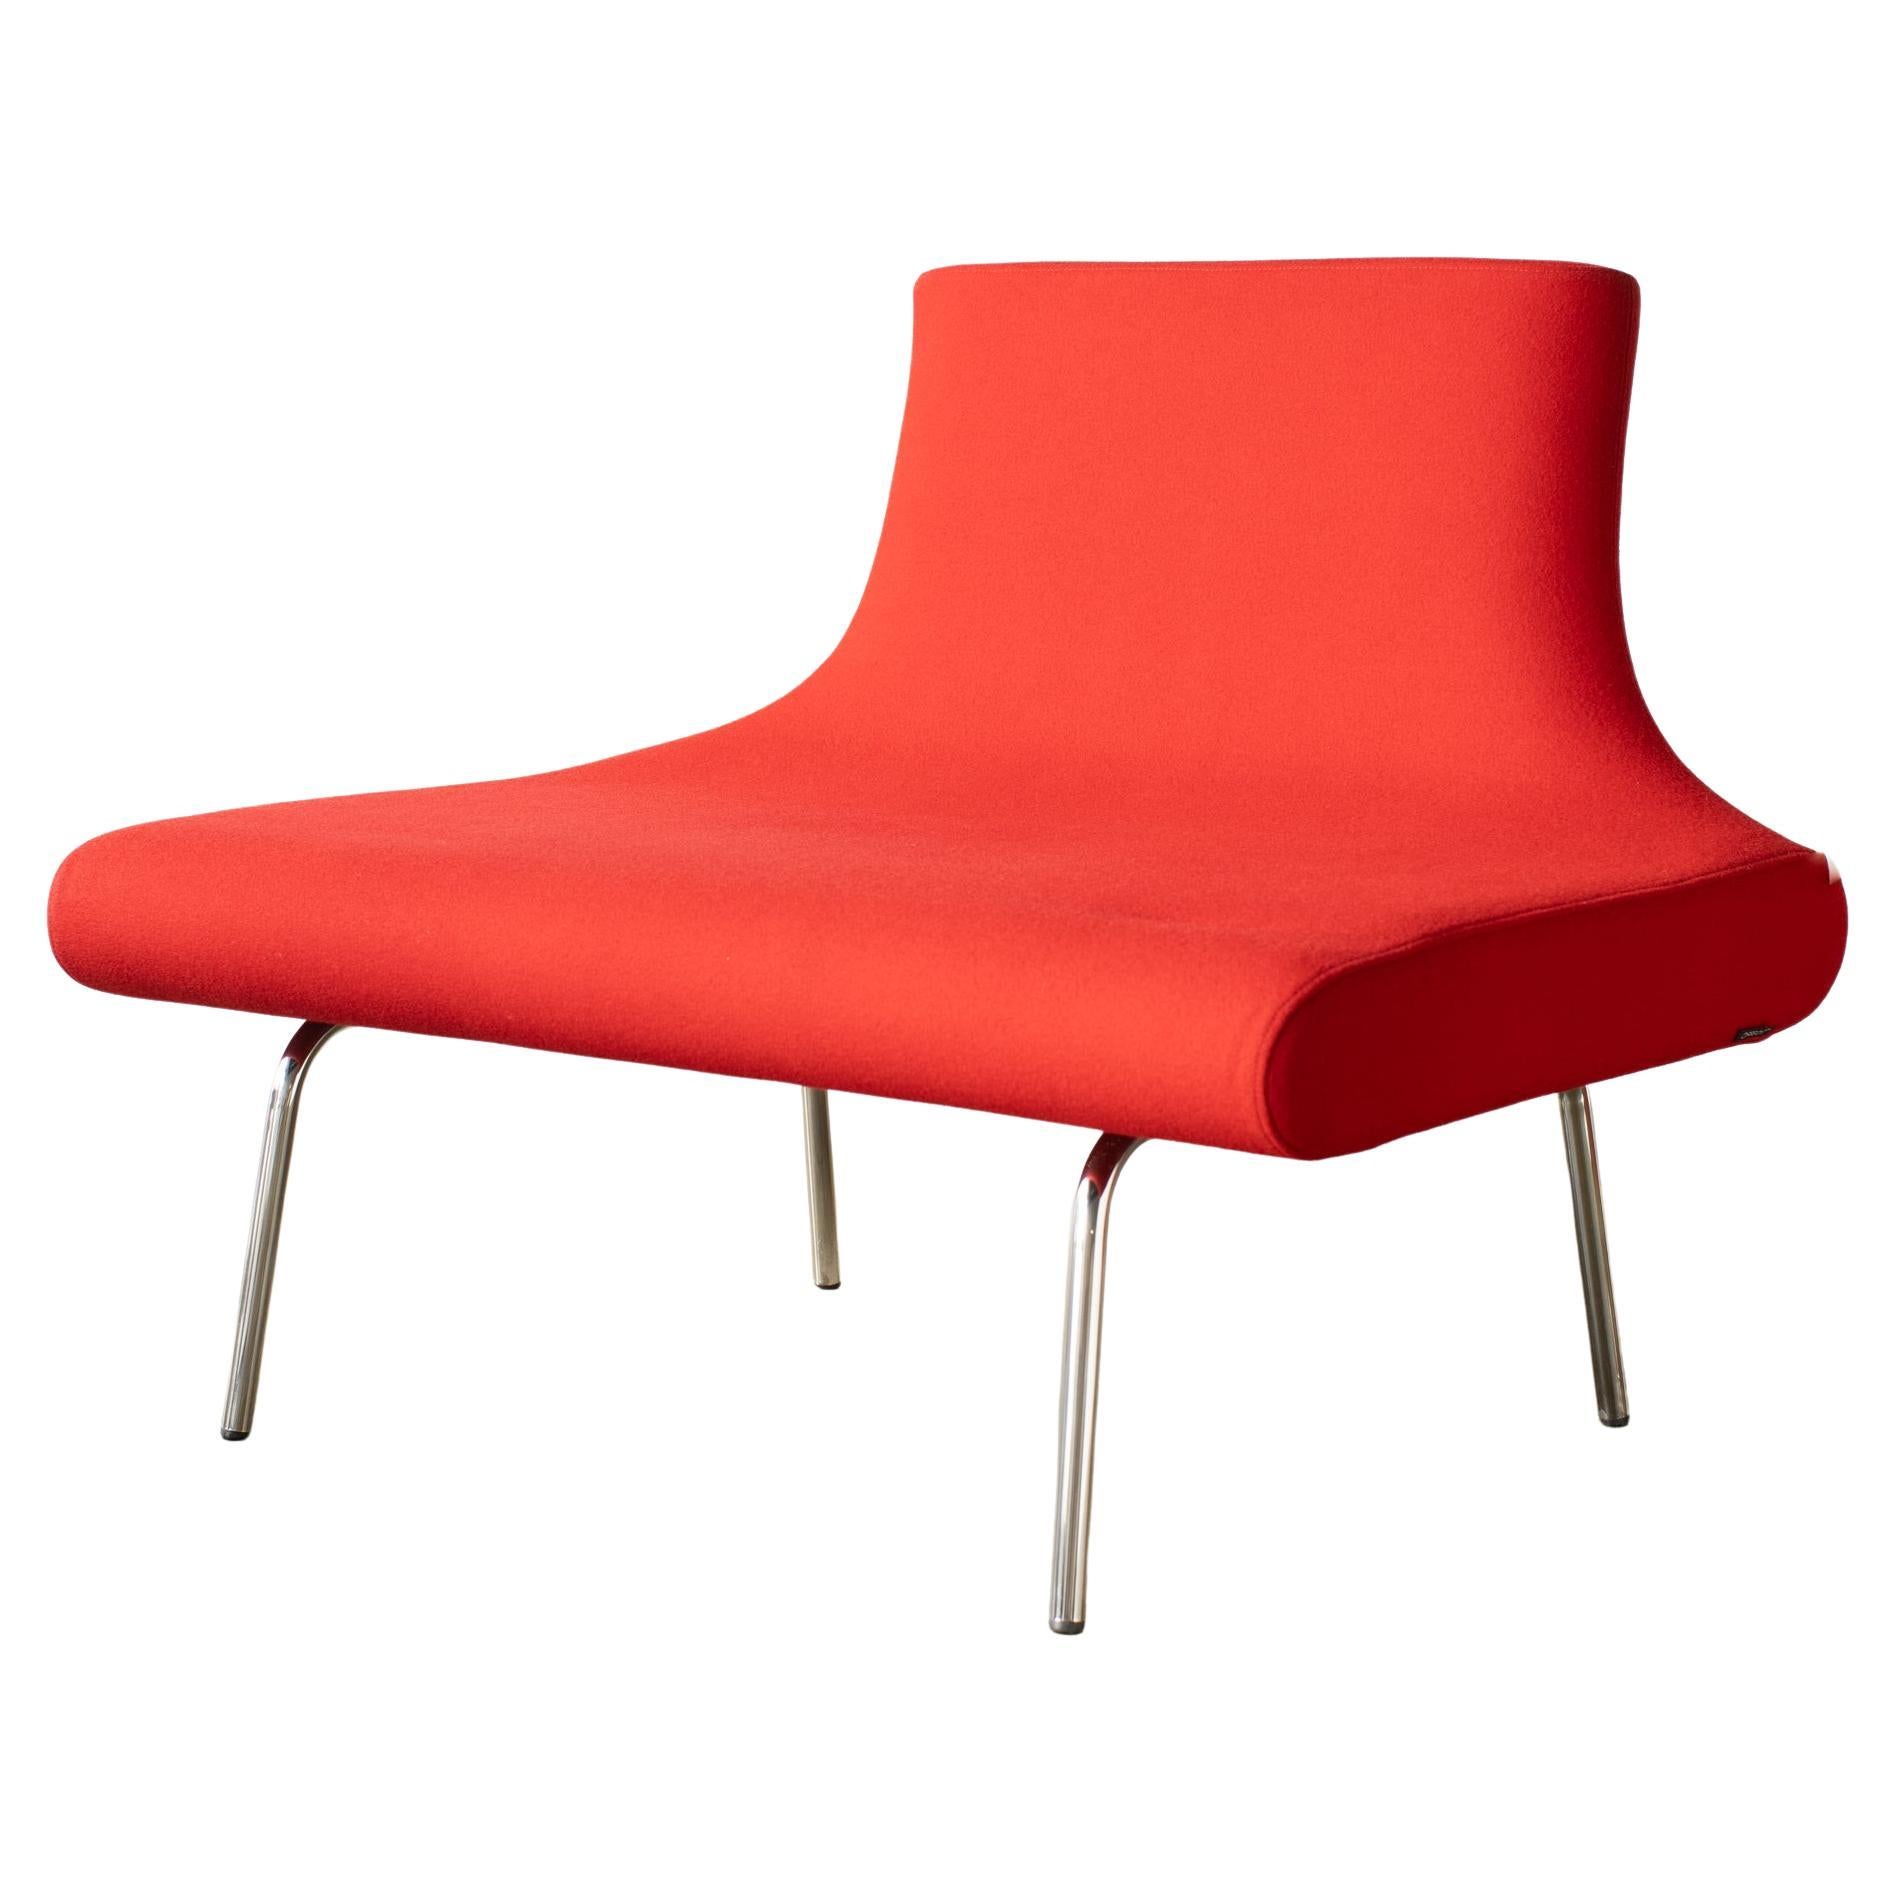 Chair red fabric Orbit sofa Eero Koivisto  Y2K style design space age For Sale